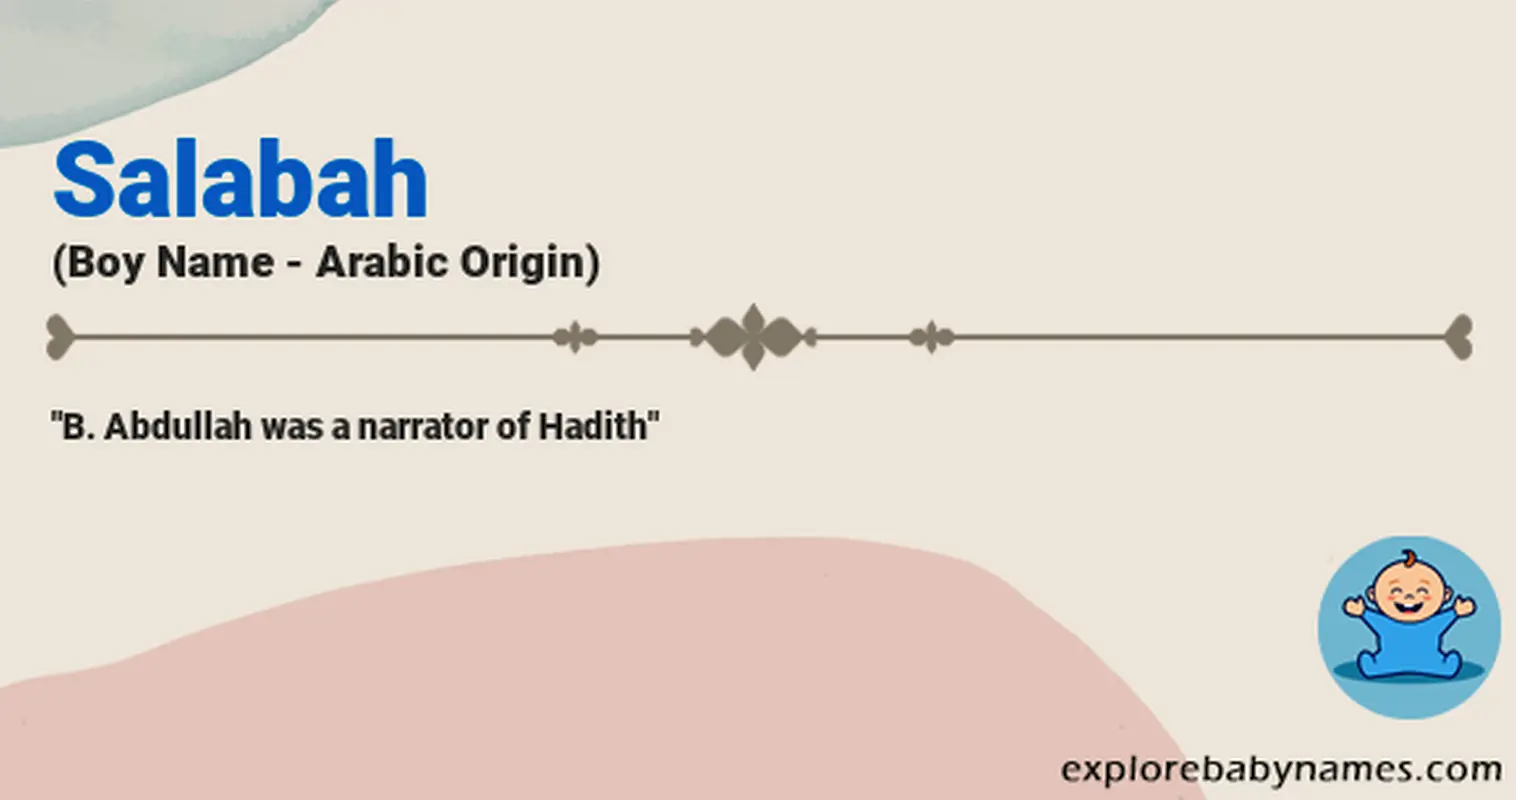 Meaning of Salabah